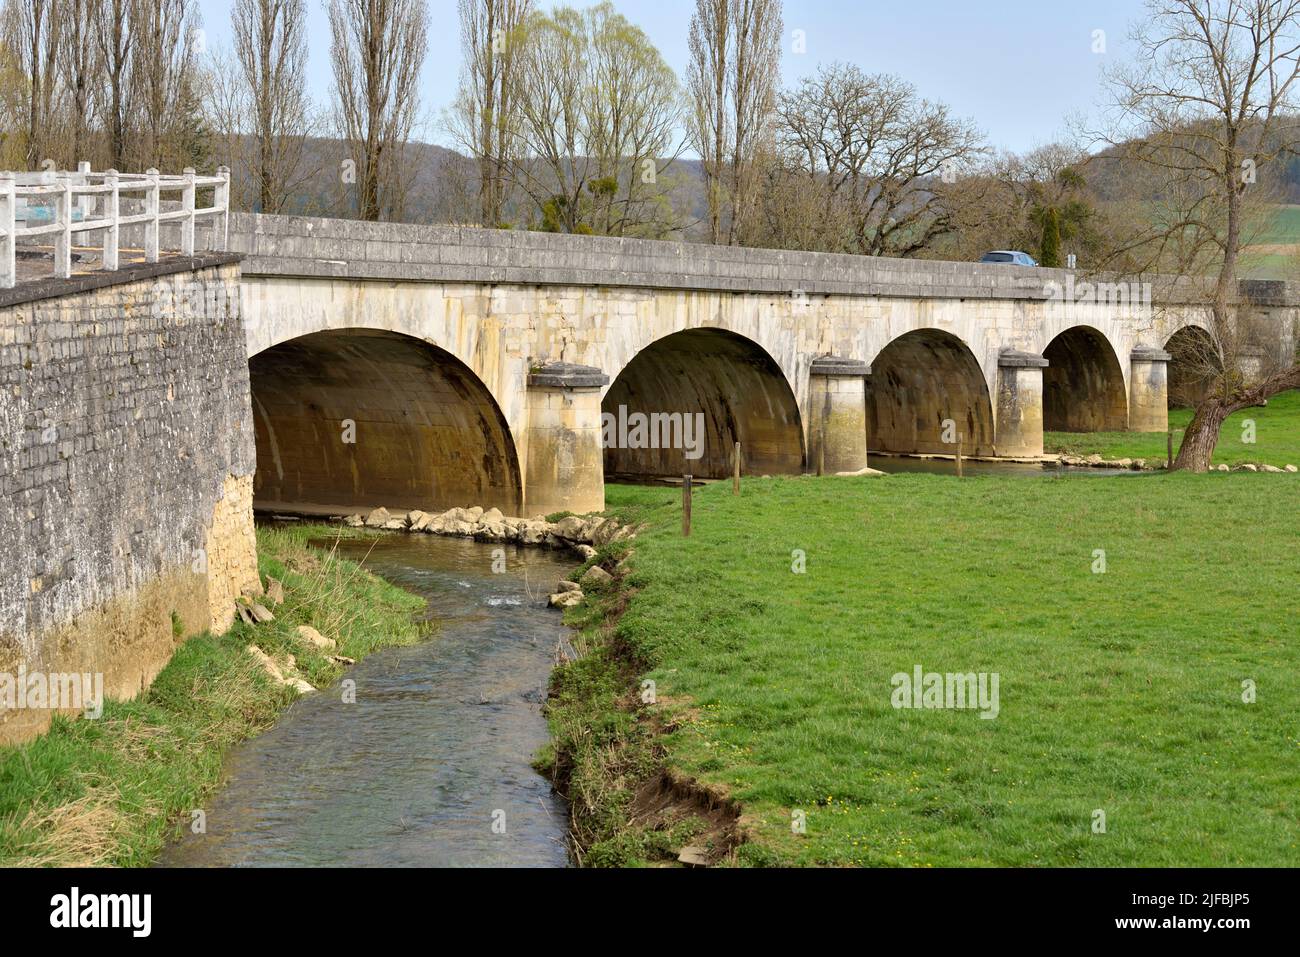 France, Vosges, Domremy la Pucelle, birthplace of Joan of Arc, bridge over the Meuse river Stock Photo